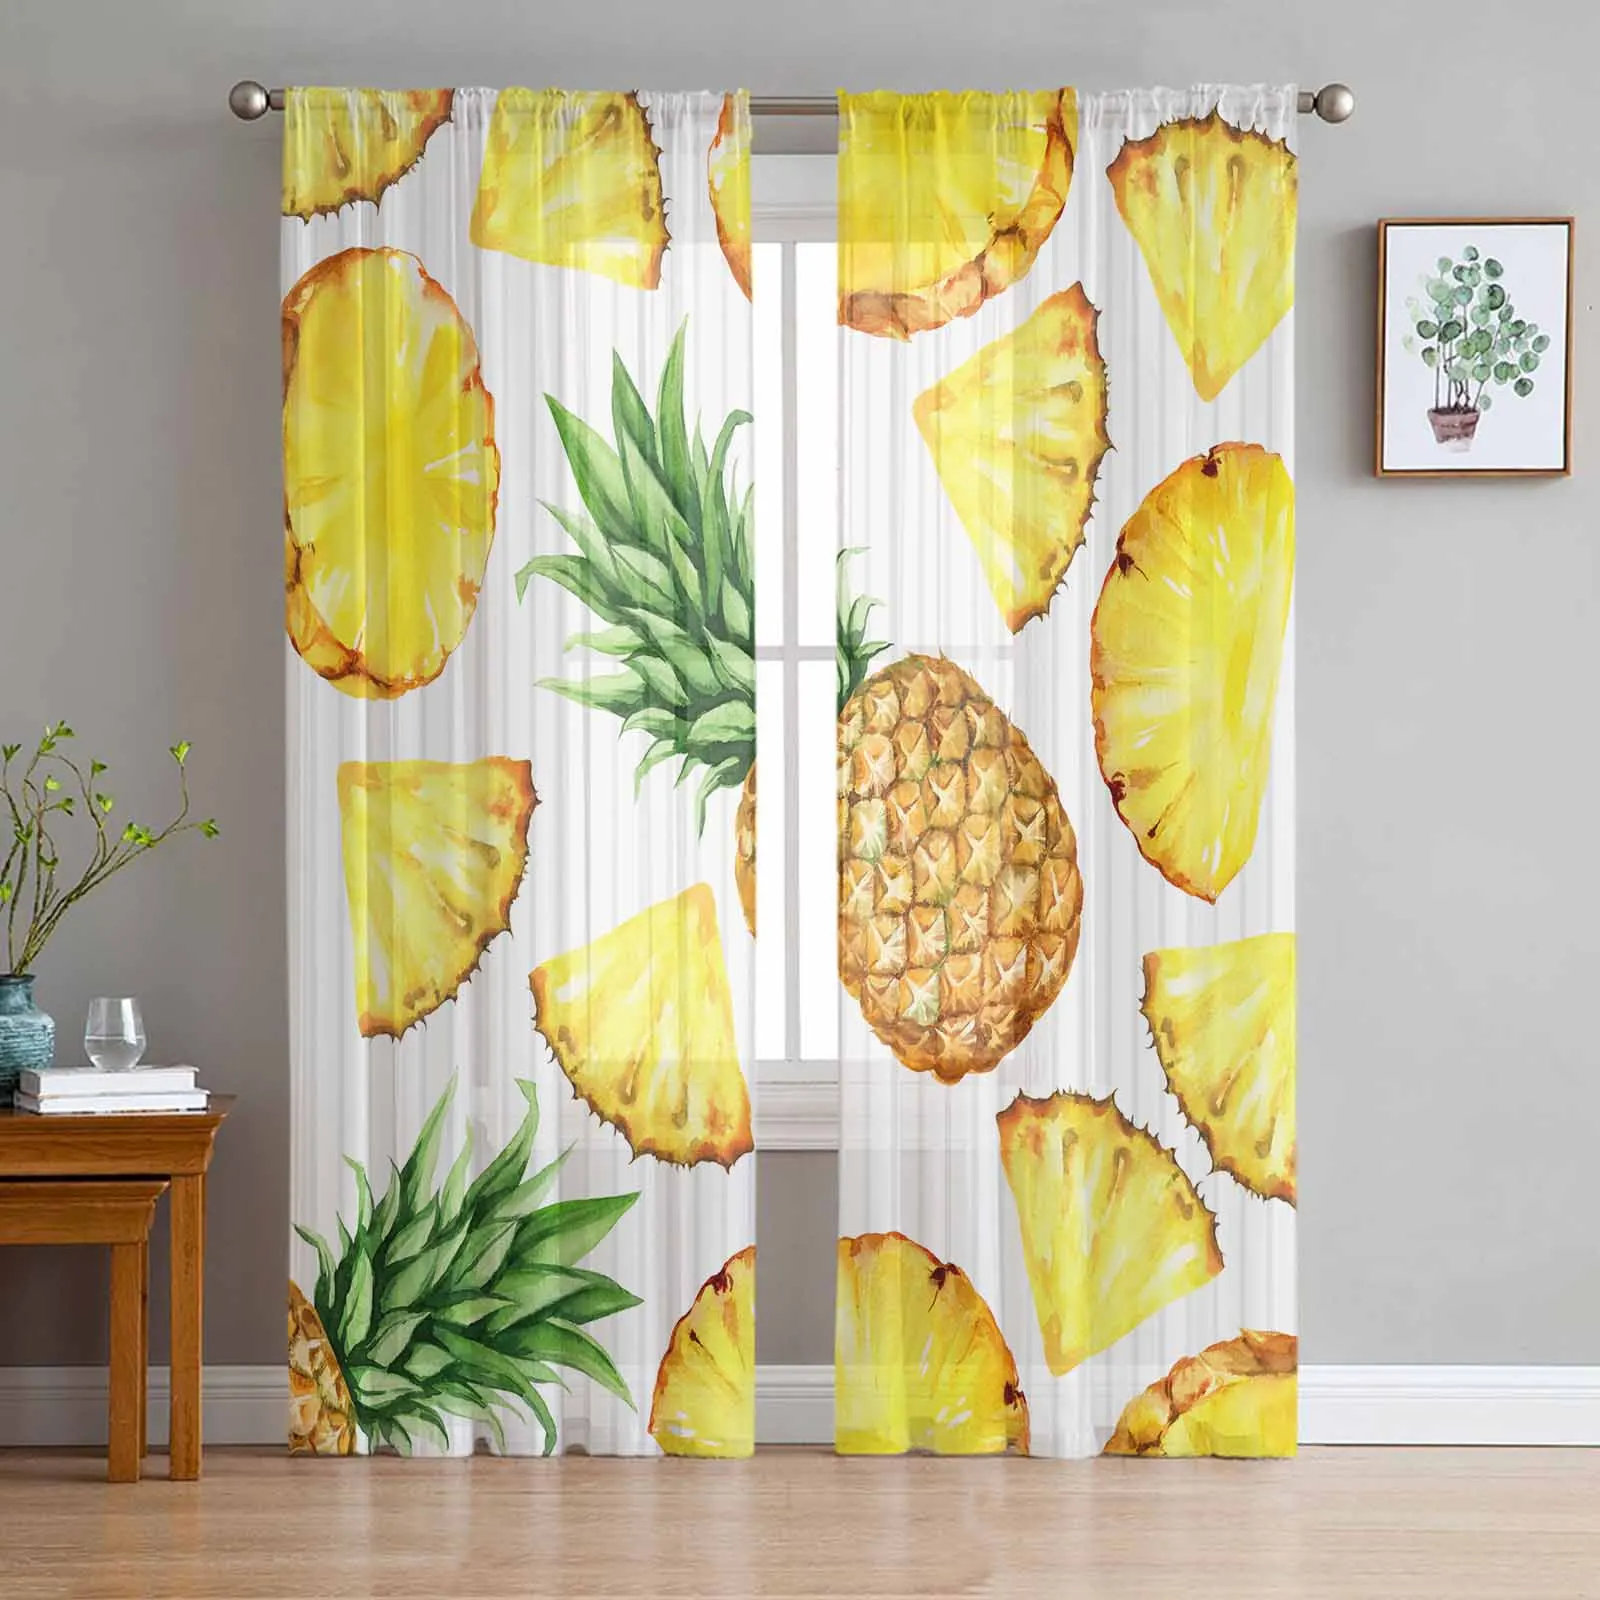 

Watercolor Pineapple Texture Sheer Curtains for Living Room Modern Home Decor Tulle Curtain Bedroom Voile Drapes